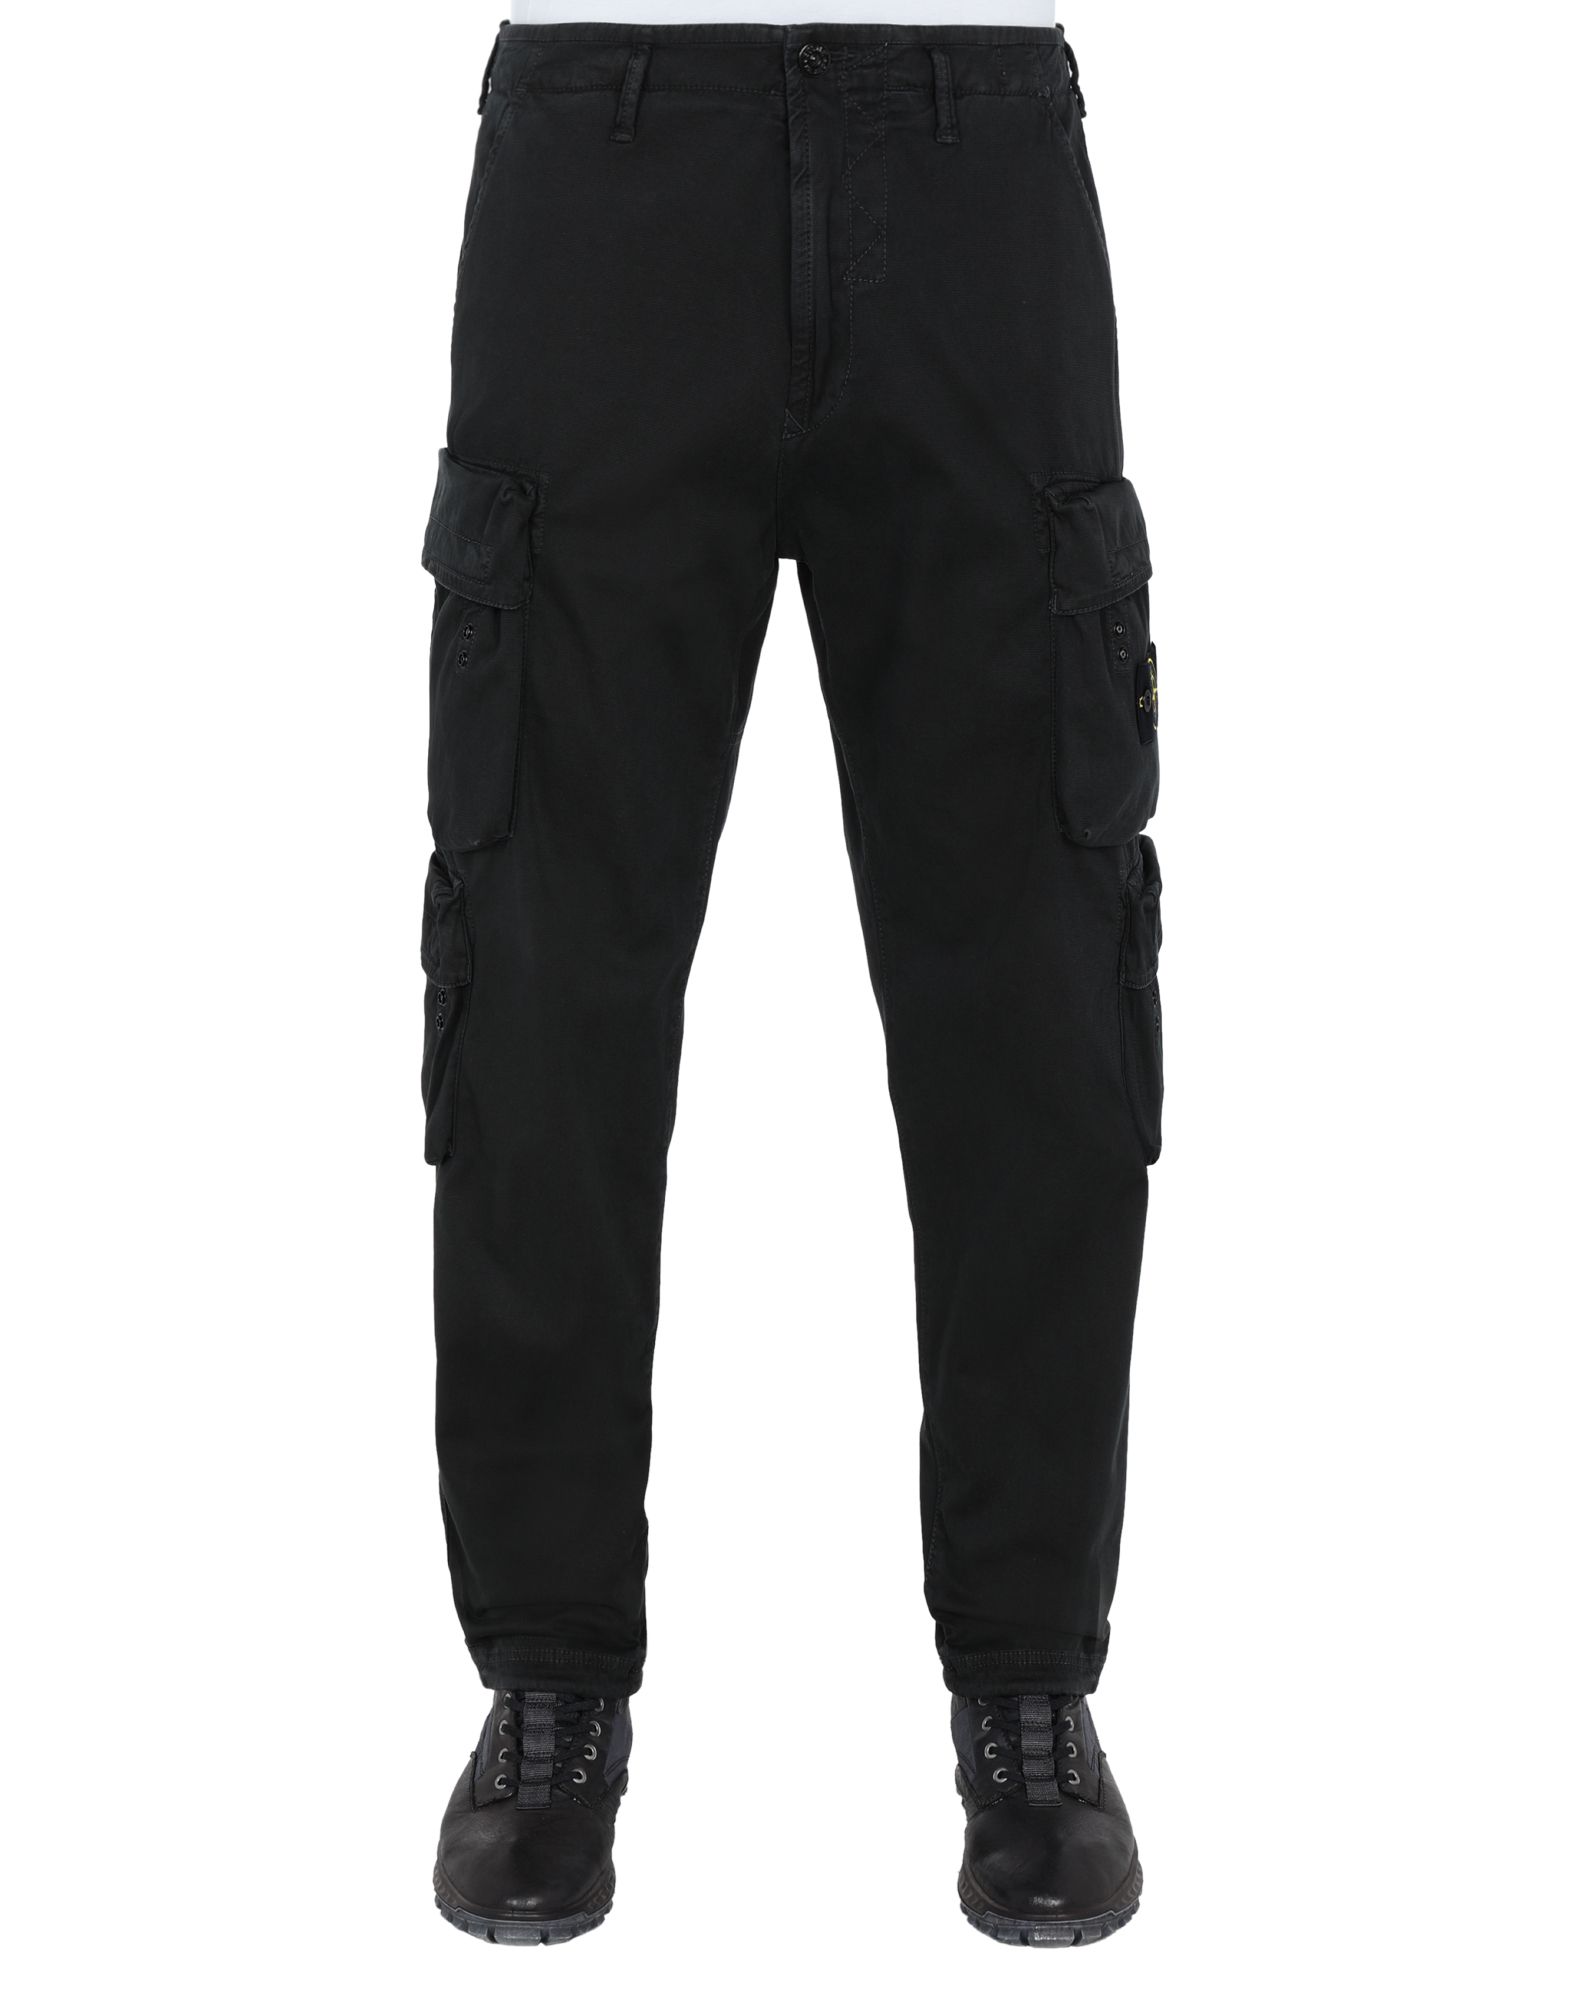 30702 OLD DYE TREATMENT TROUSERS